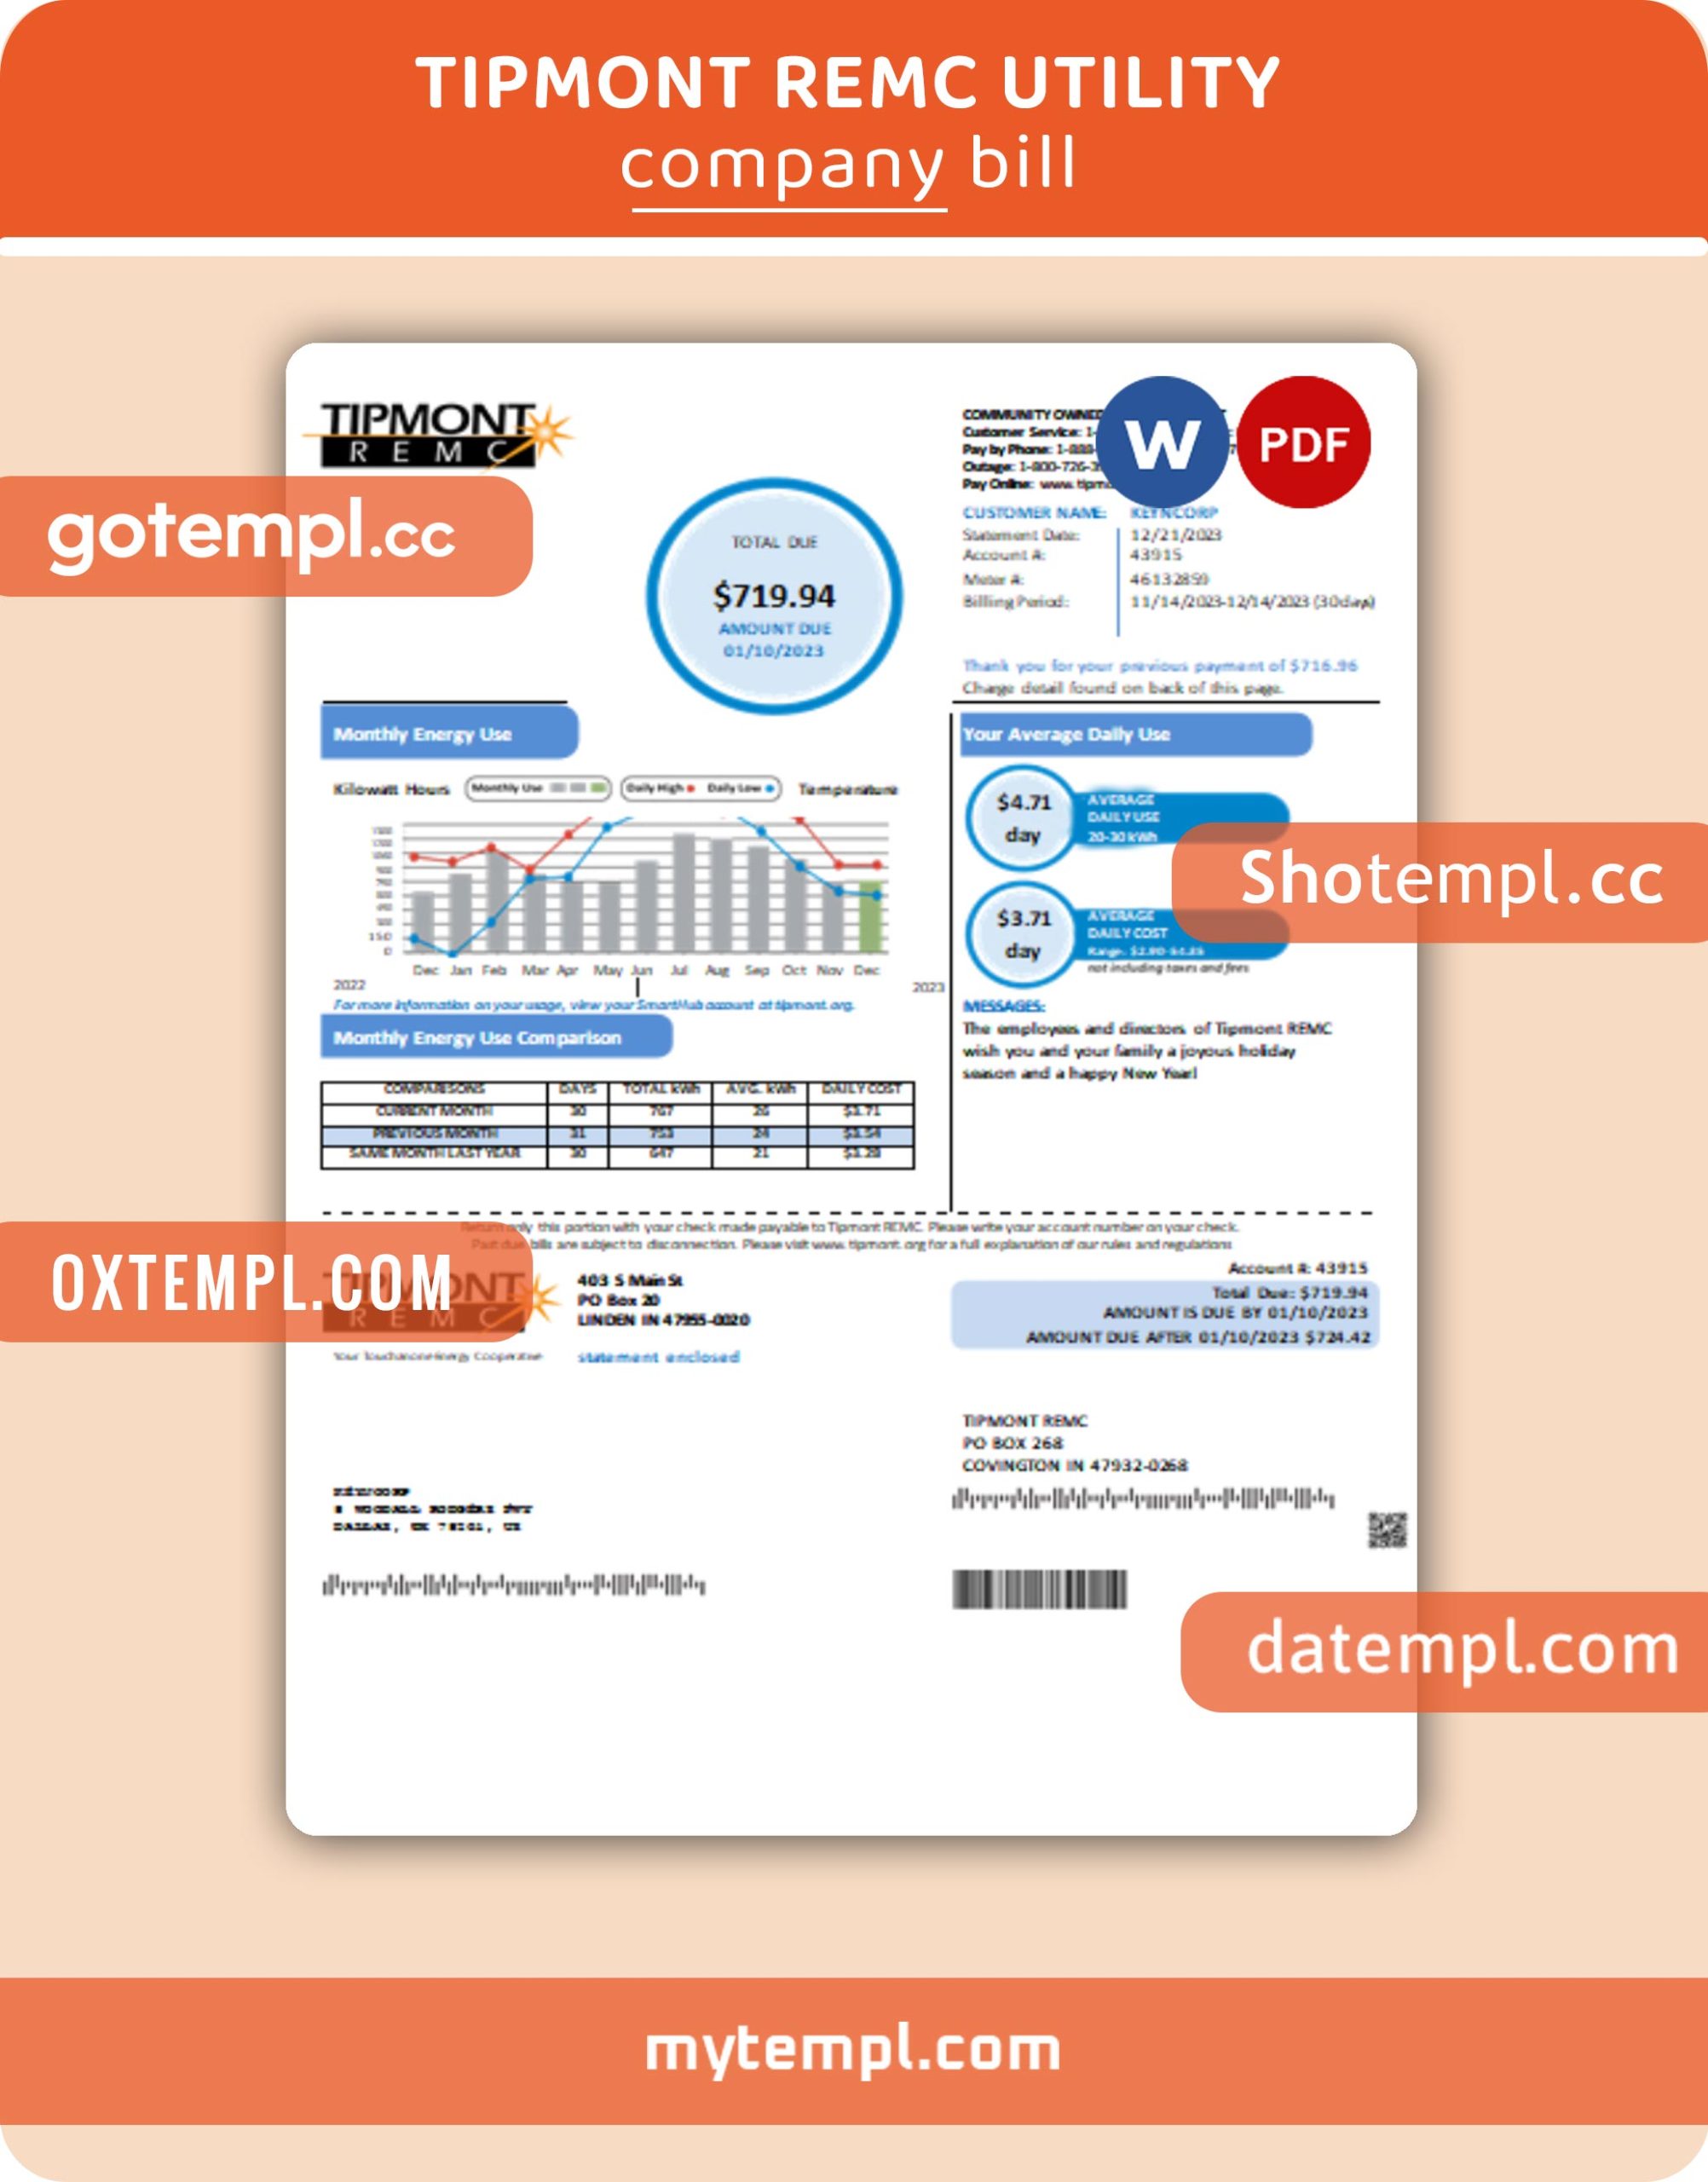 Tipmont REMC business utility bill, Word and PDF template, 2 pages